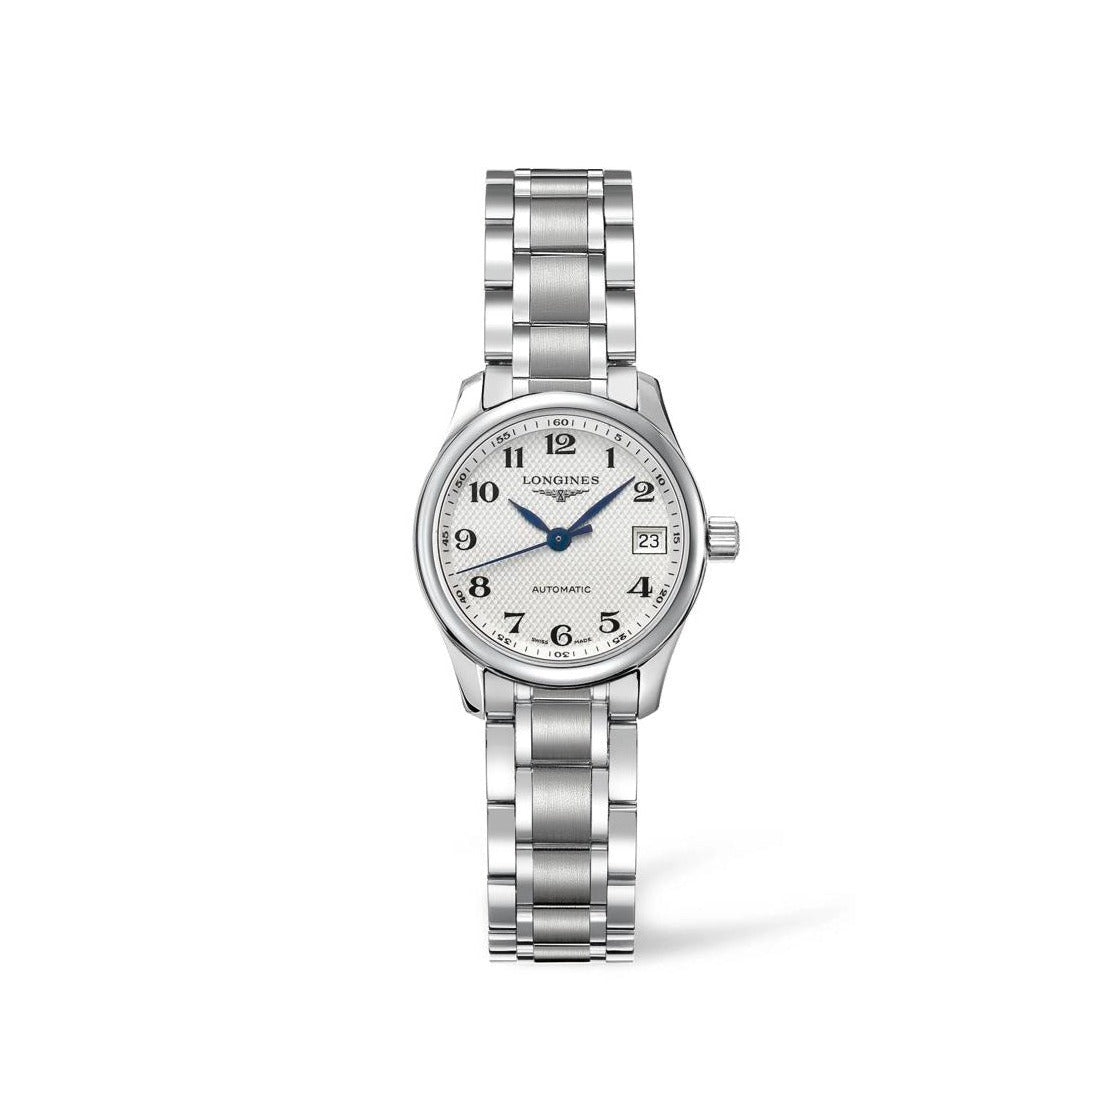 Women's Master Collection Watch with Round Stainless Steel Case White Arabic Dial and Date Window